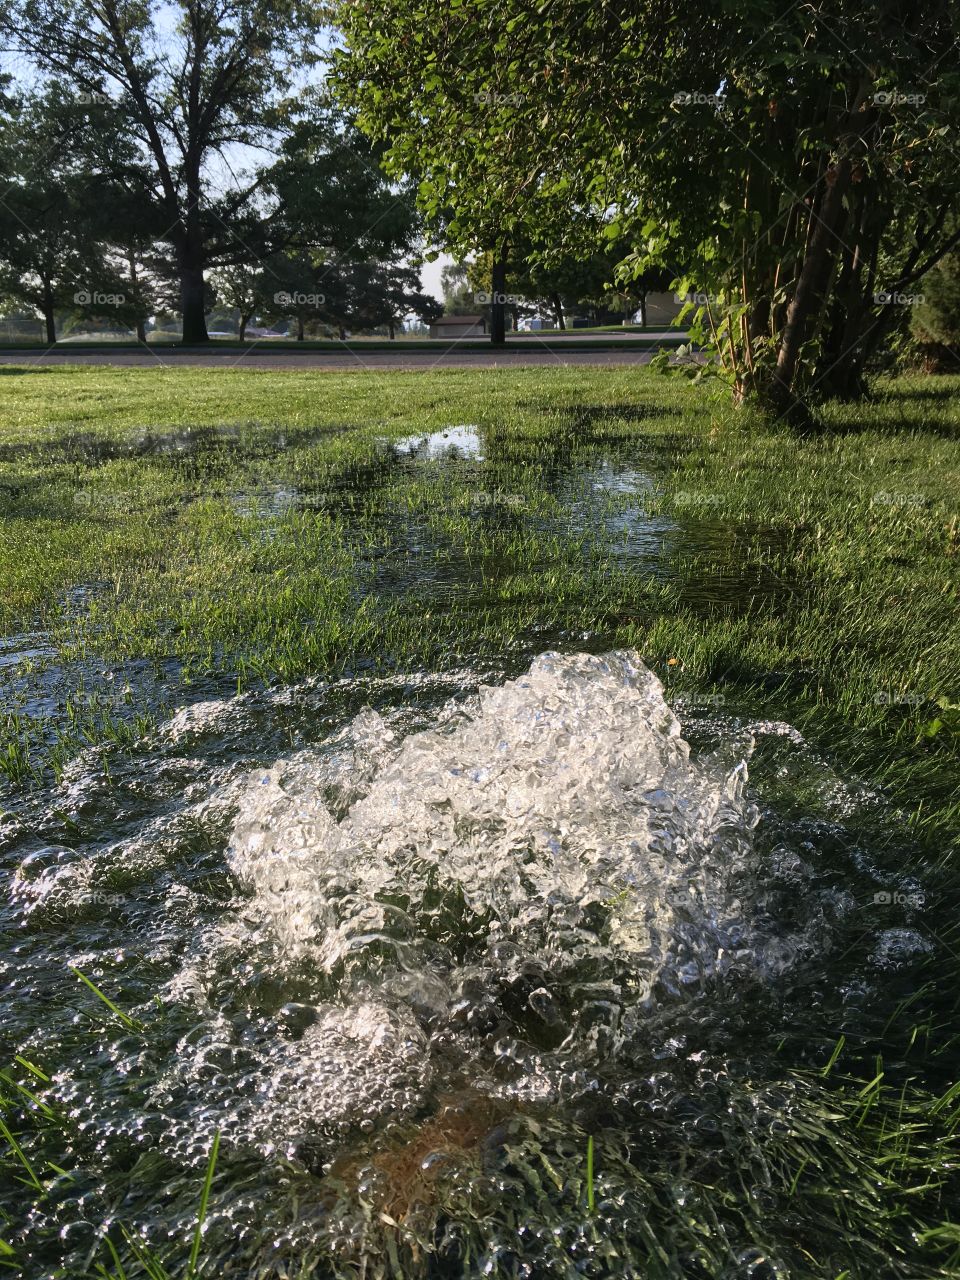 Water on the lawn.